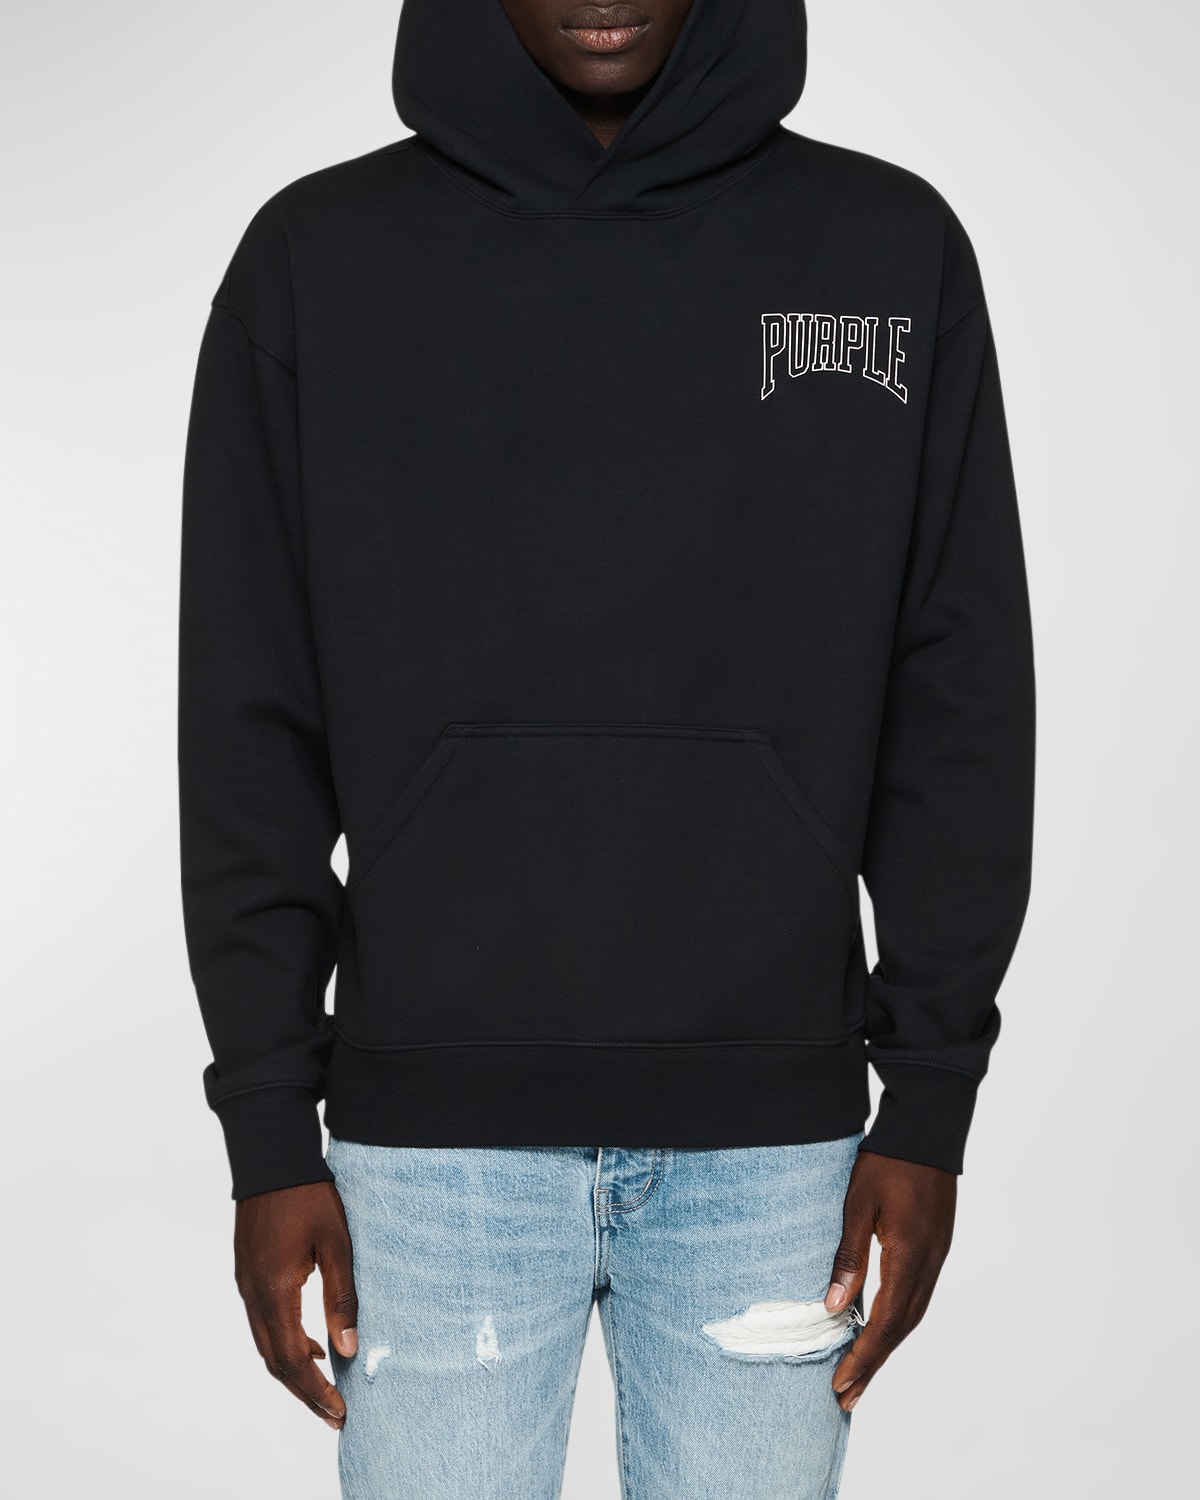 Men's French Terry Graphic Hoodie